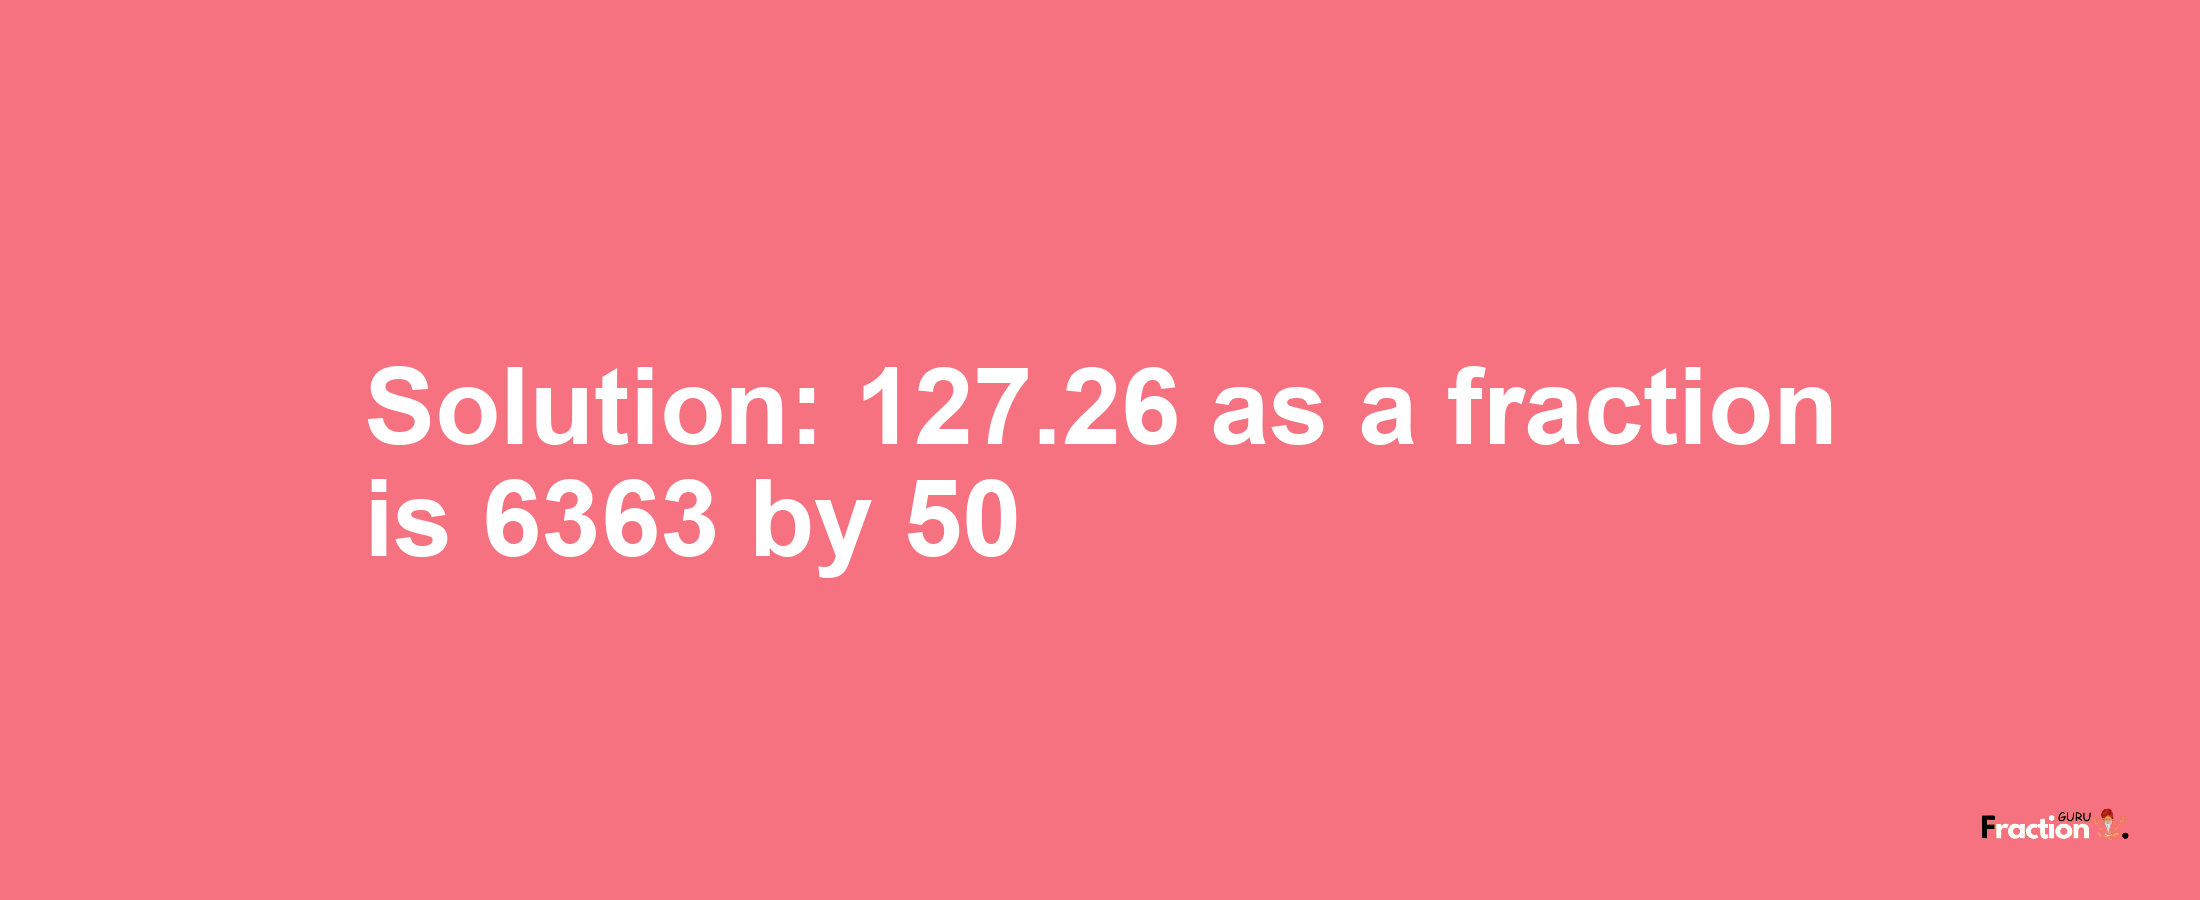 Solution:127.26 as a fraction is 6363/50